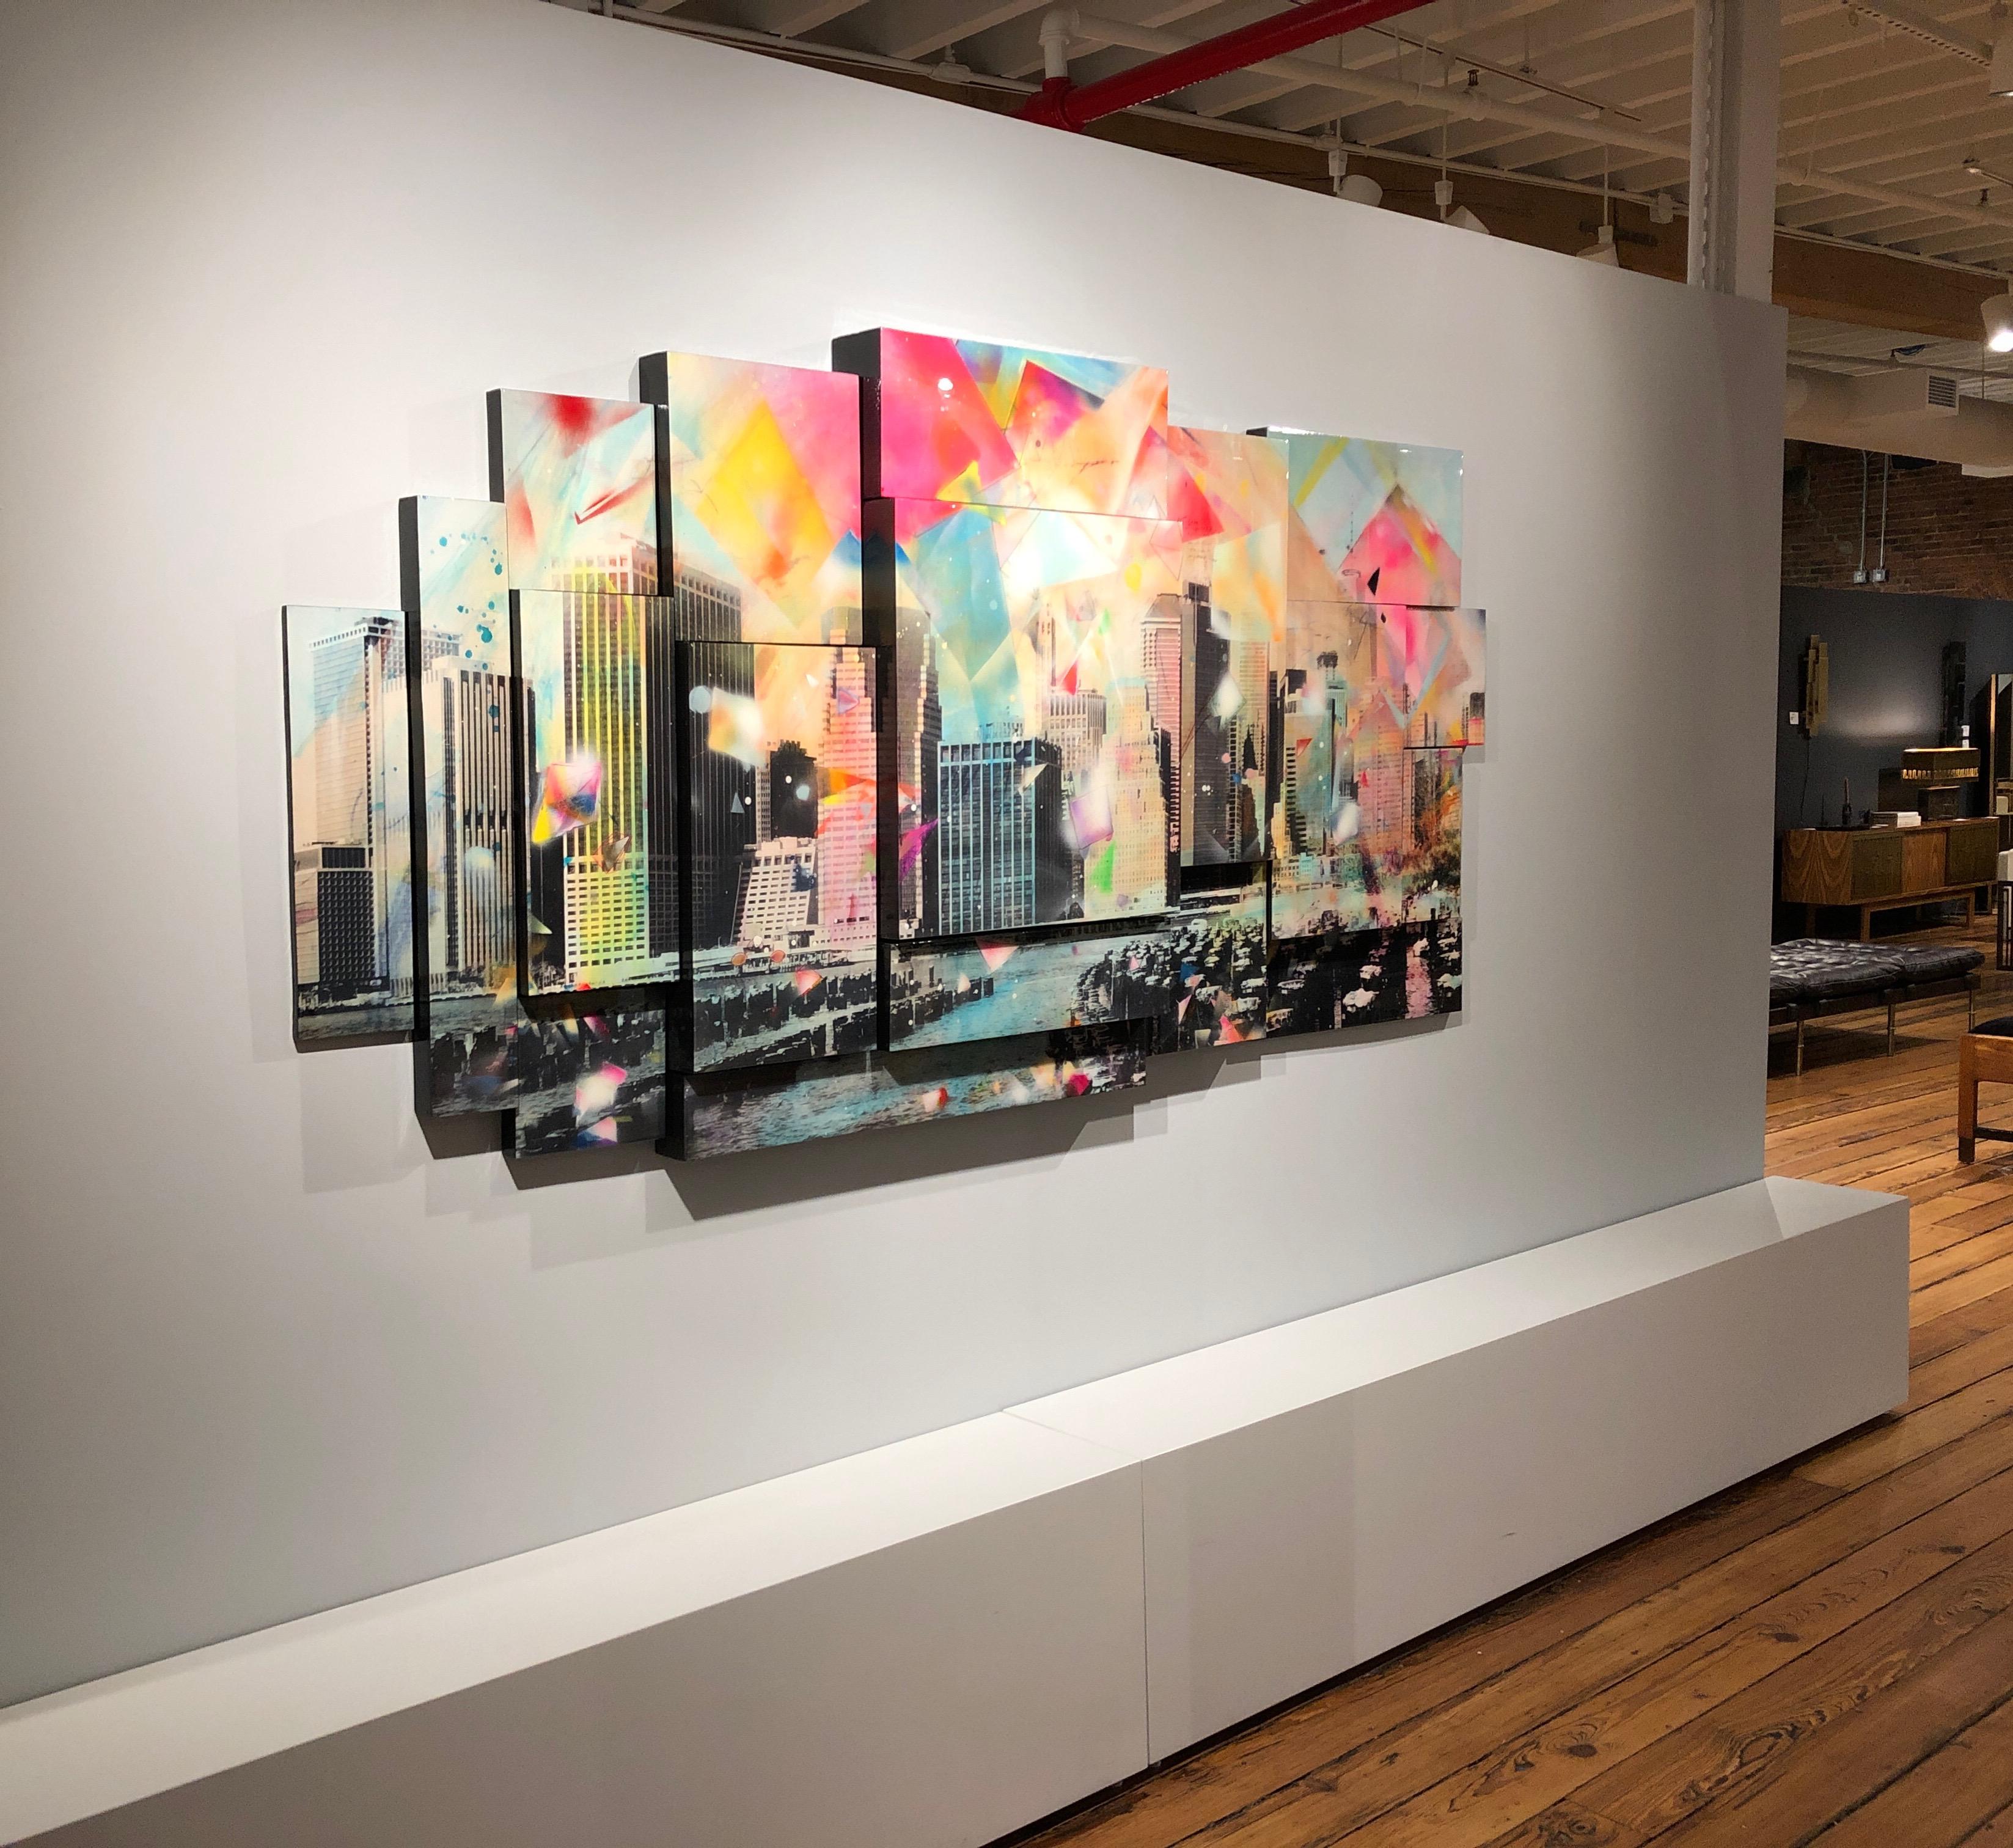 This is one of Alberto Sanchez's most iconic contemporary art installations. This gorgeous painted photograph is comprised of 18 pieces that fit together, creating a dynamic & multi-dimensional installation. The pieces have different depths to